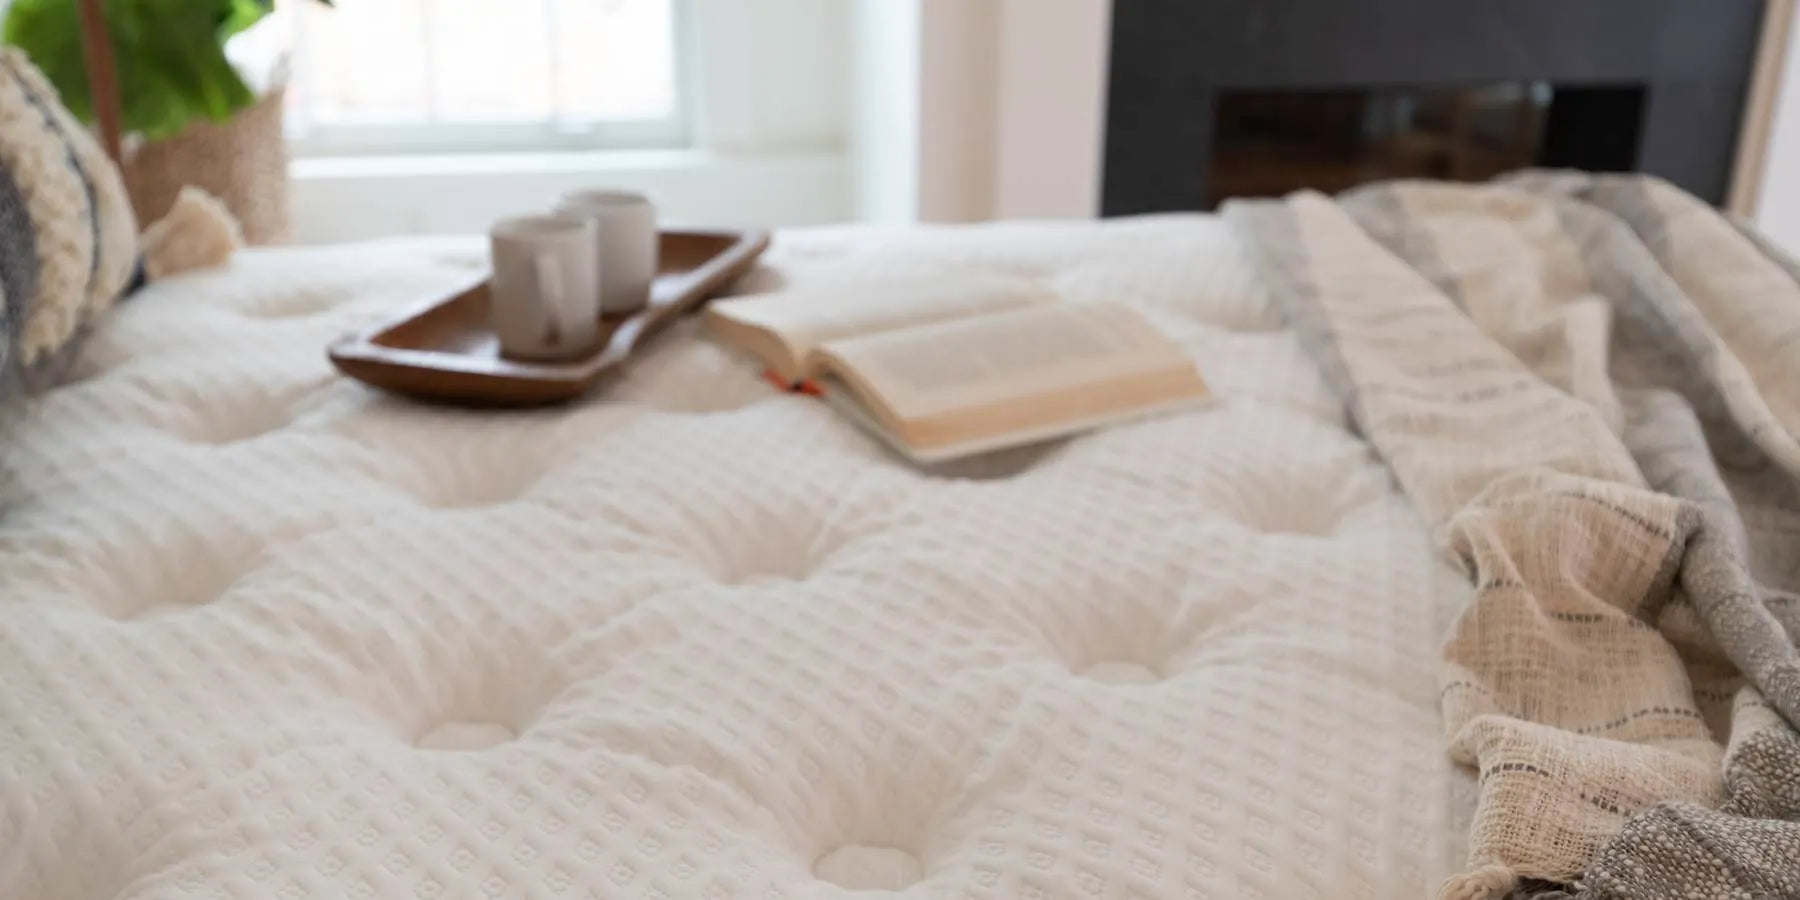 Mattress with a book and coffee mugs on a tray - Contact us for details.